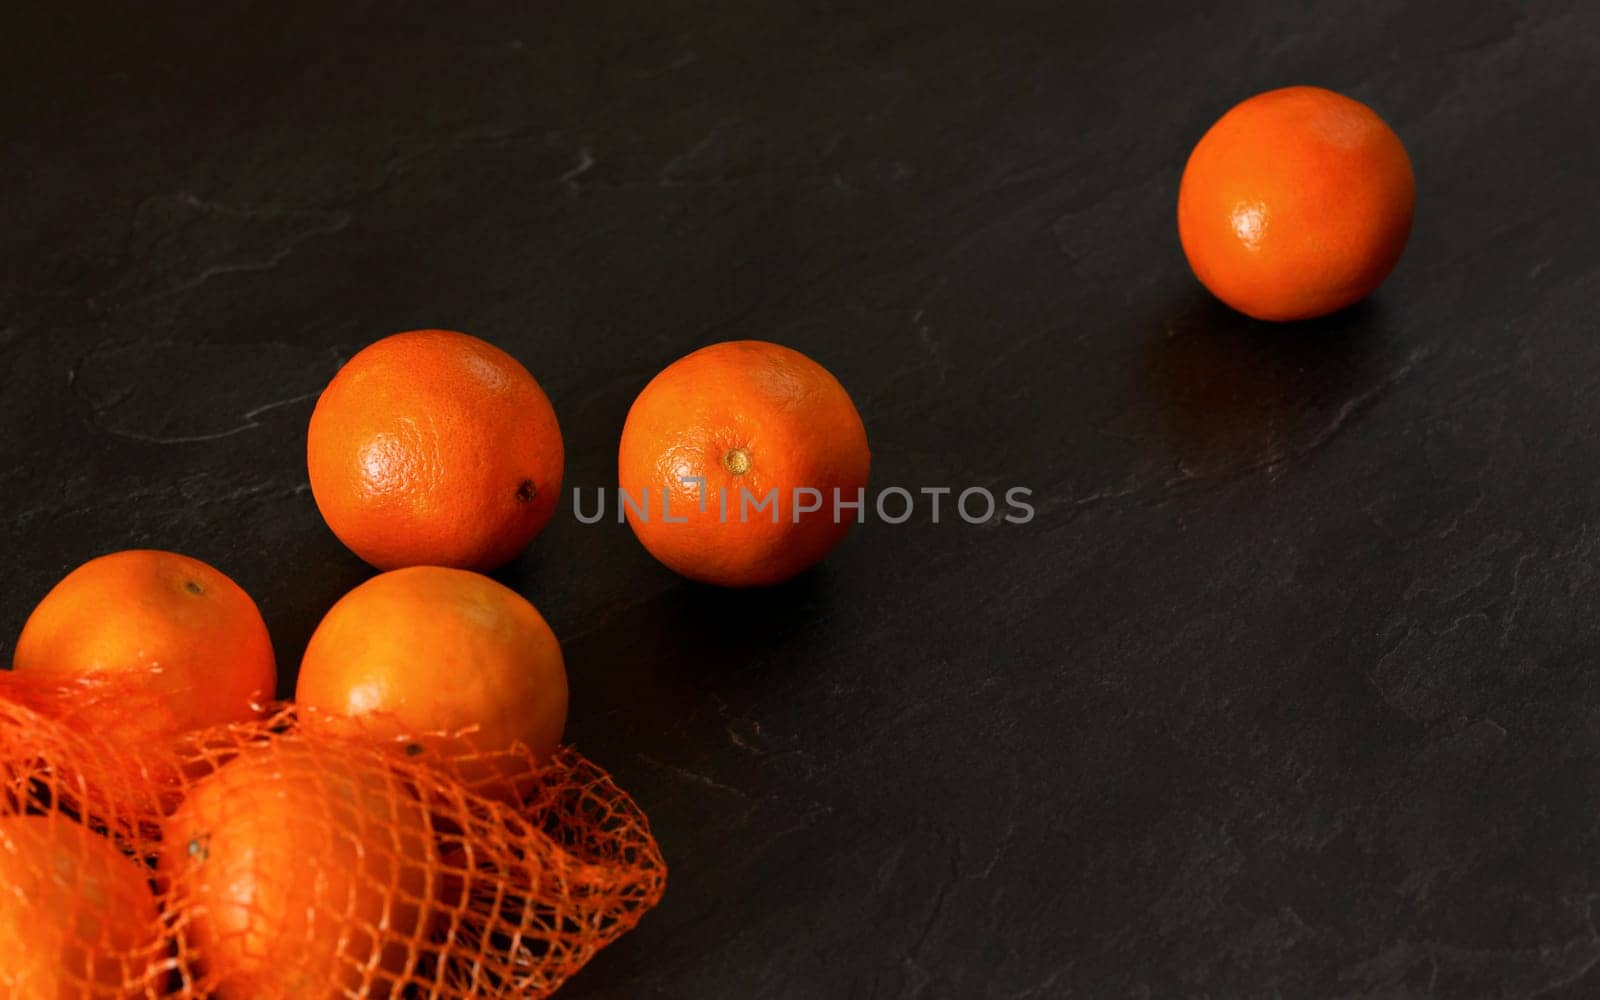 Oranges in red plastic net from supermarket, some scattered on black stone like board, flat lay photo, space for text right side